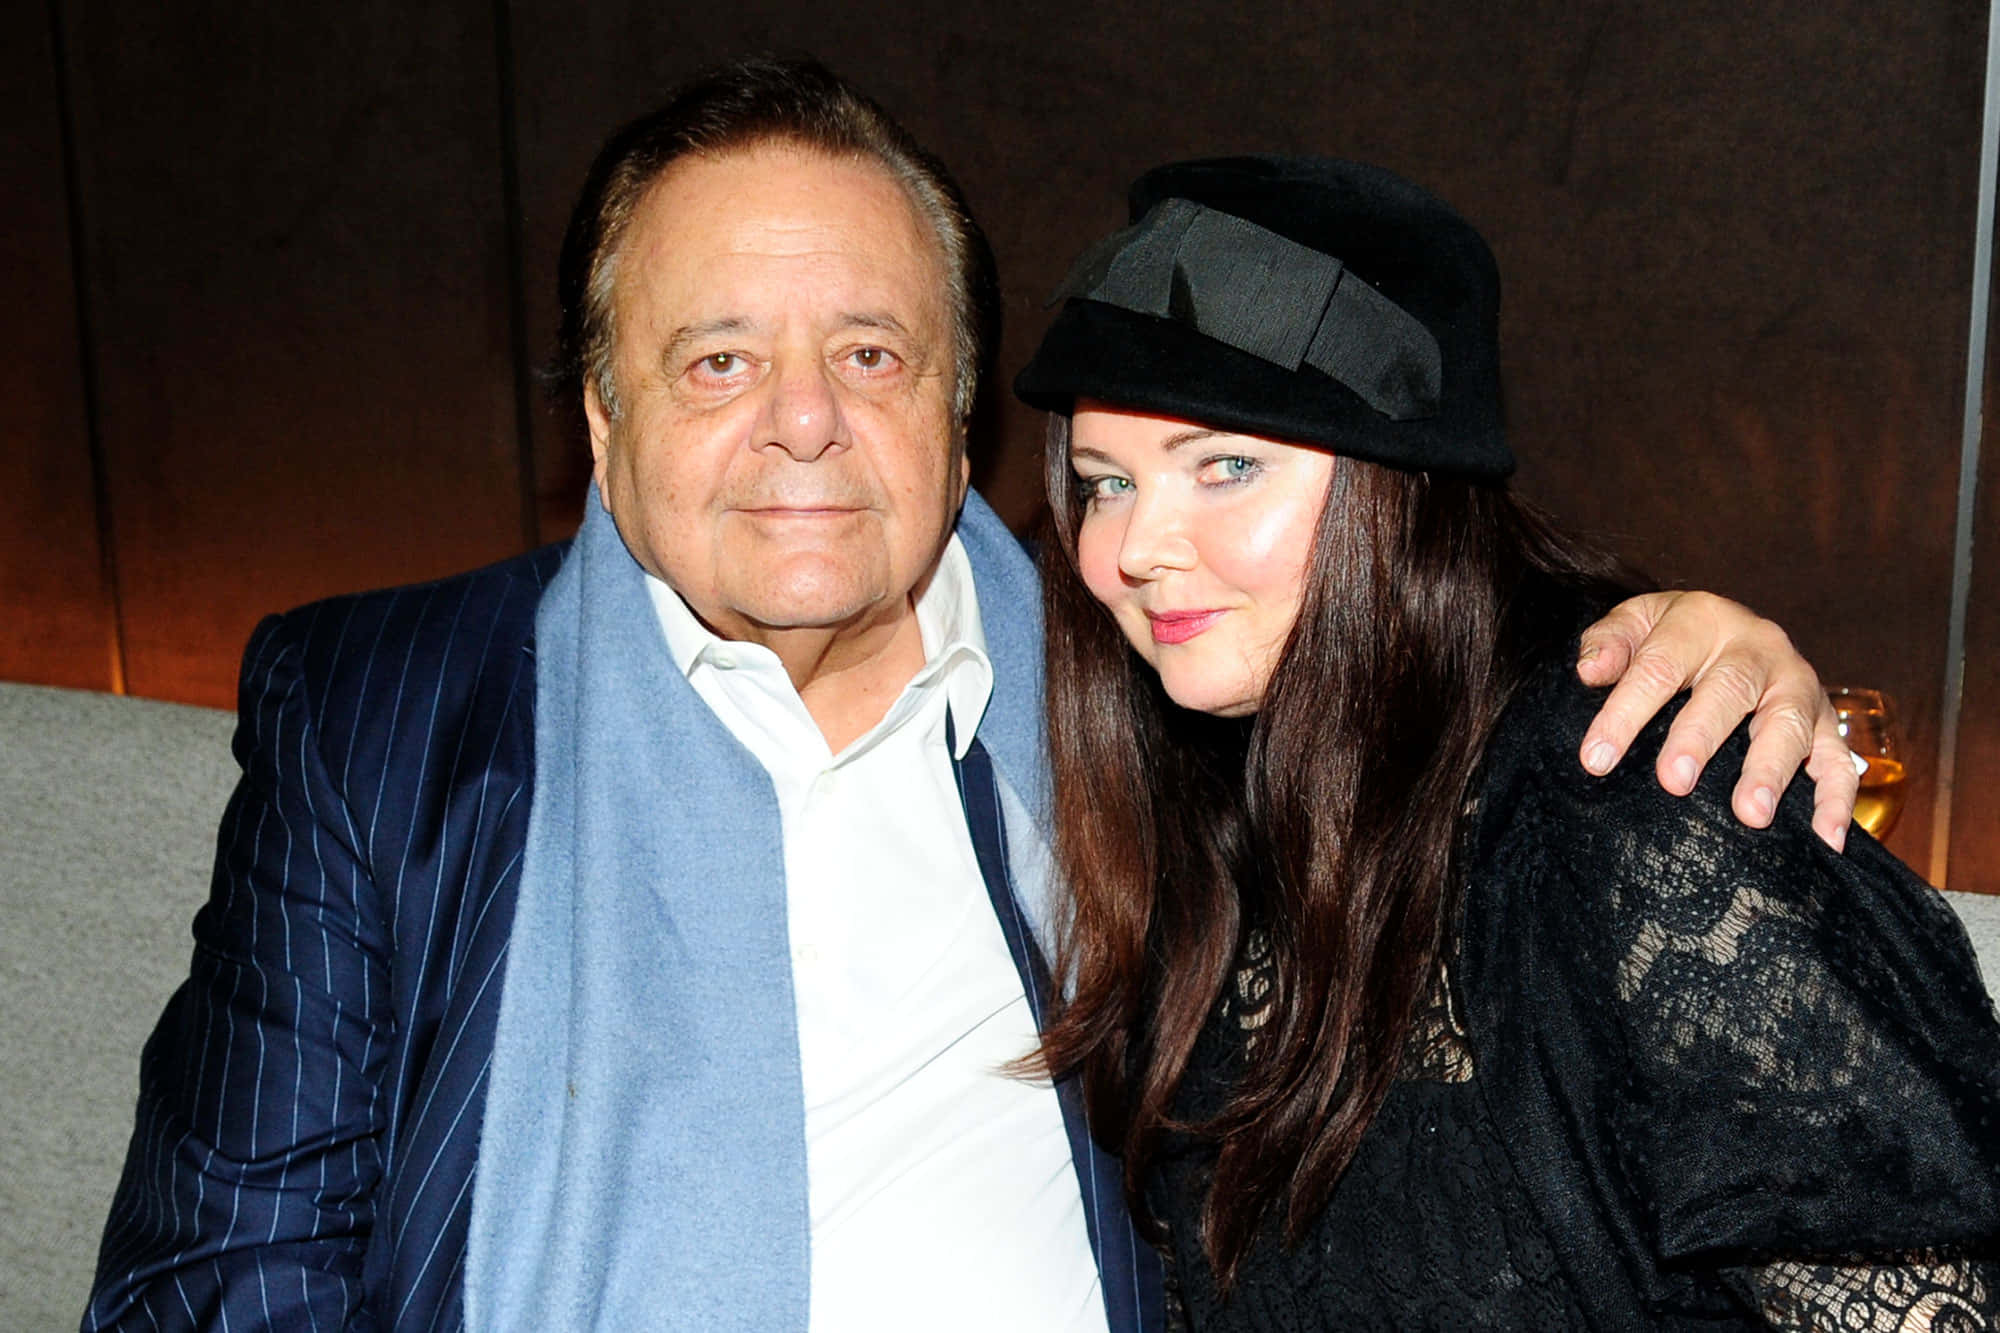 Actor Paul Sorvino attends the Carlito's Way Wall Street: Money Never Sleeps Premiere in 2010. Wallpaper